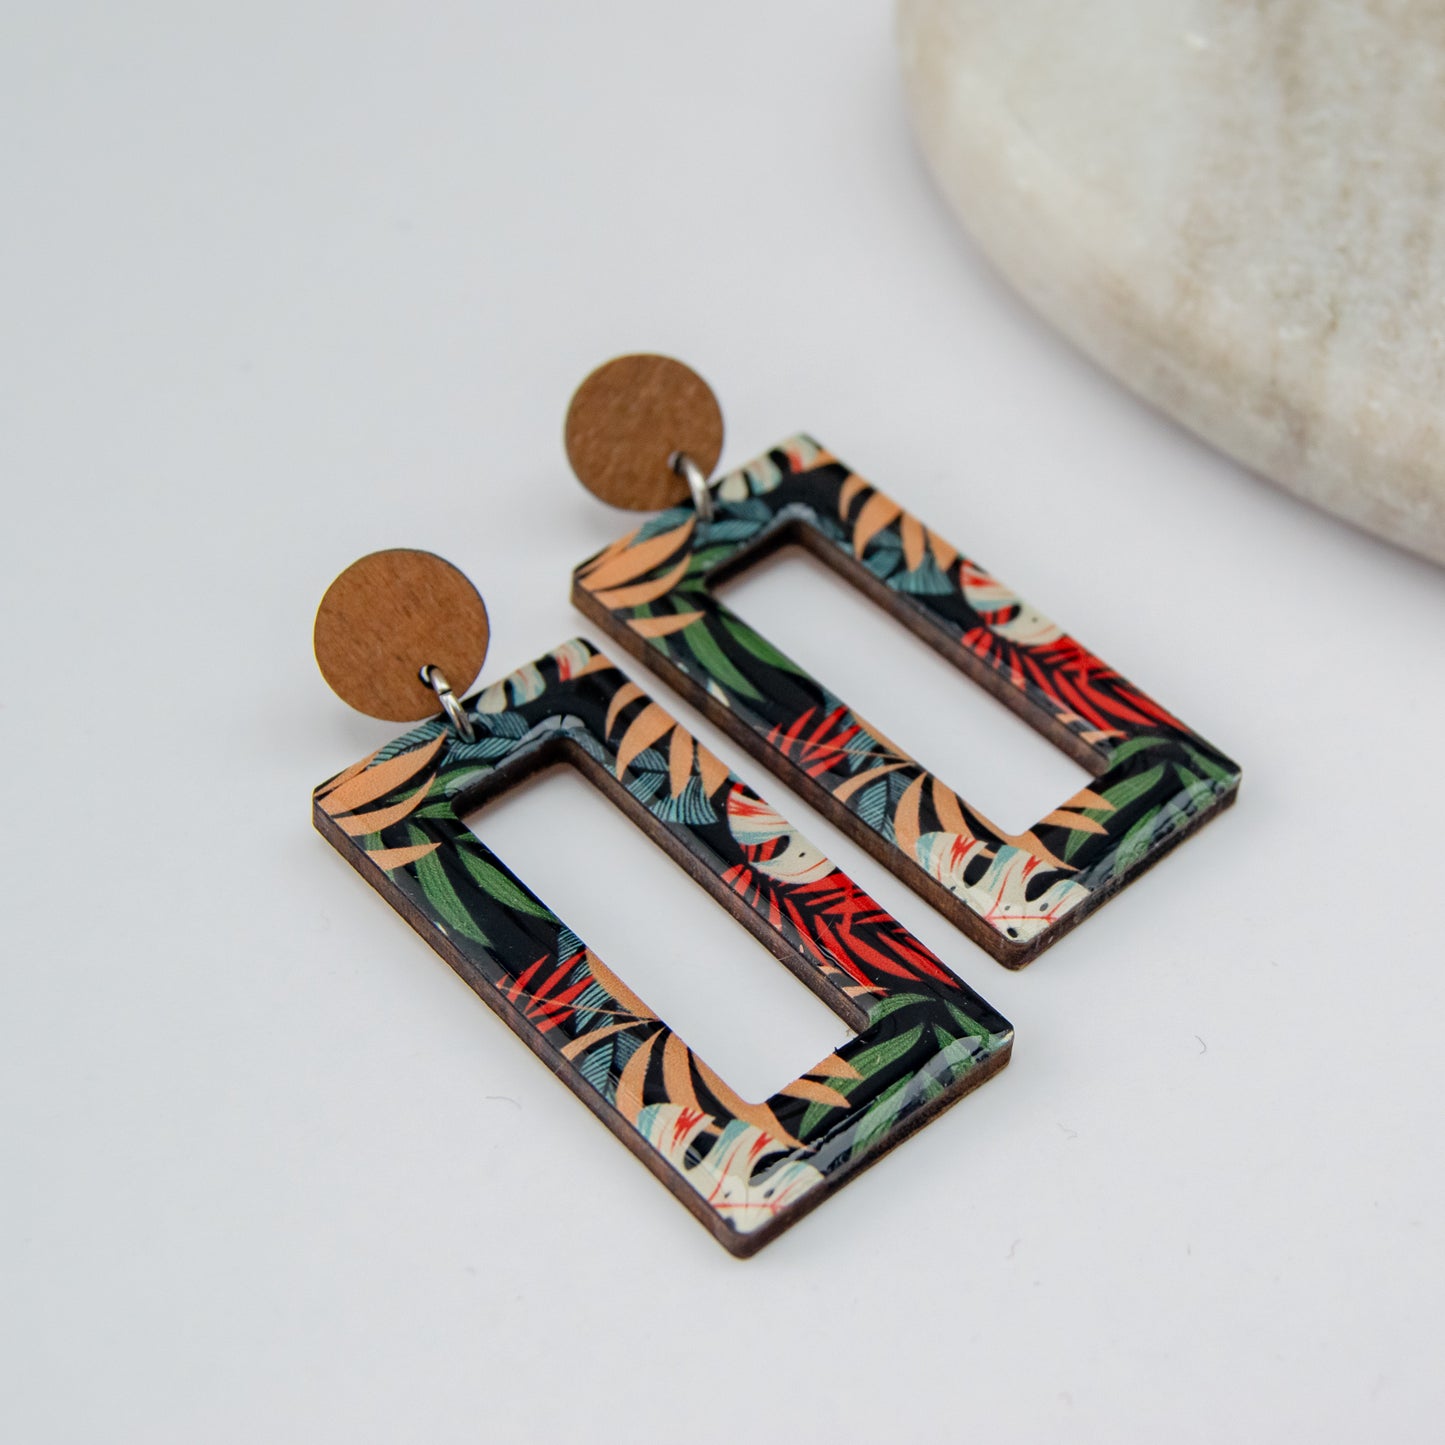 Emma - Wooden statement earrings with beautiful print of tropical leaves